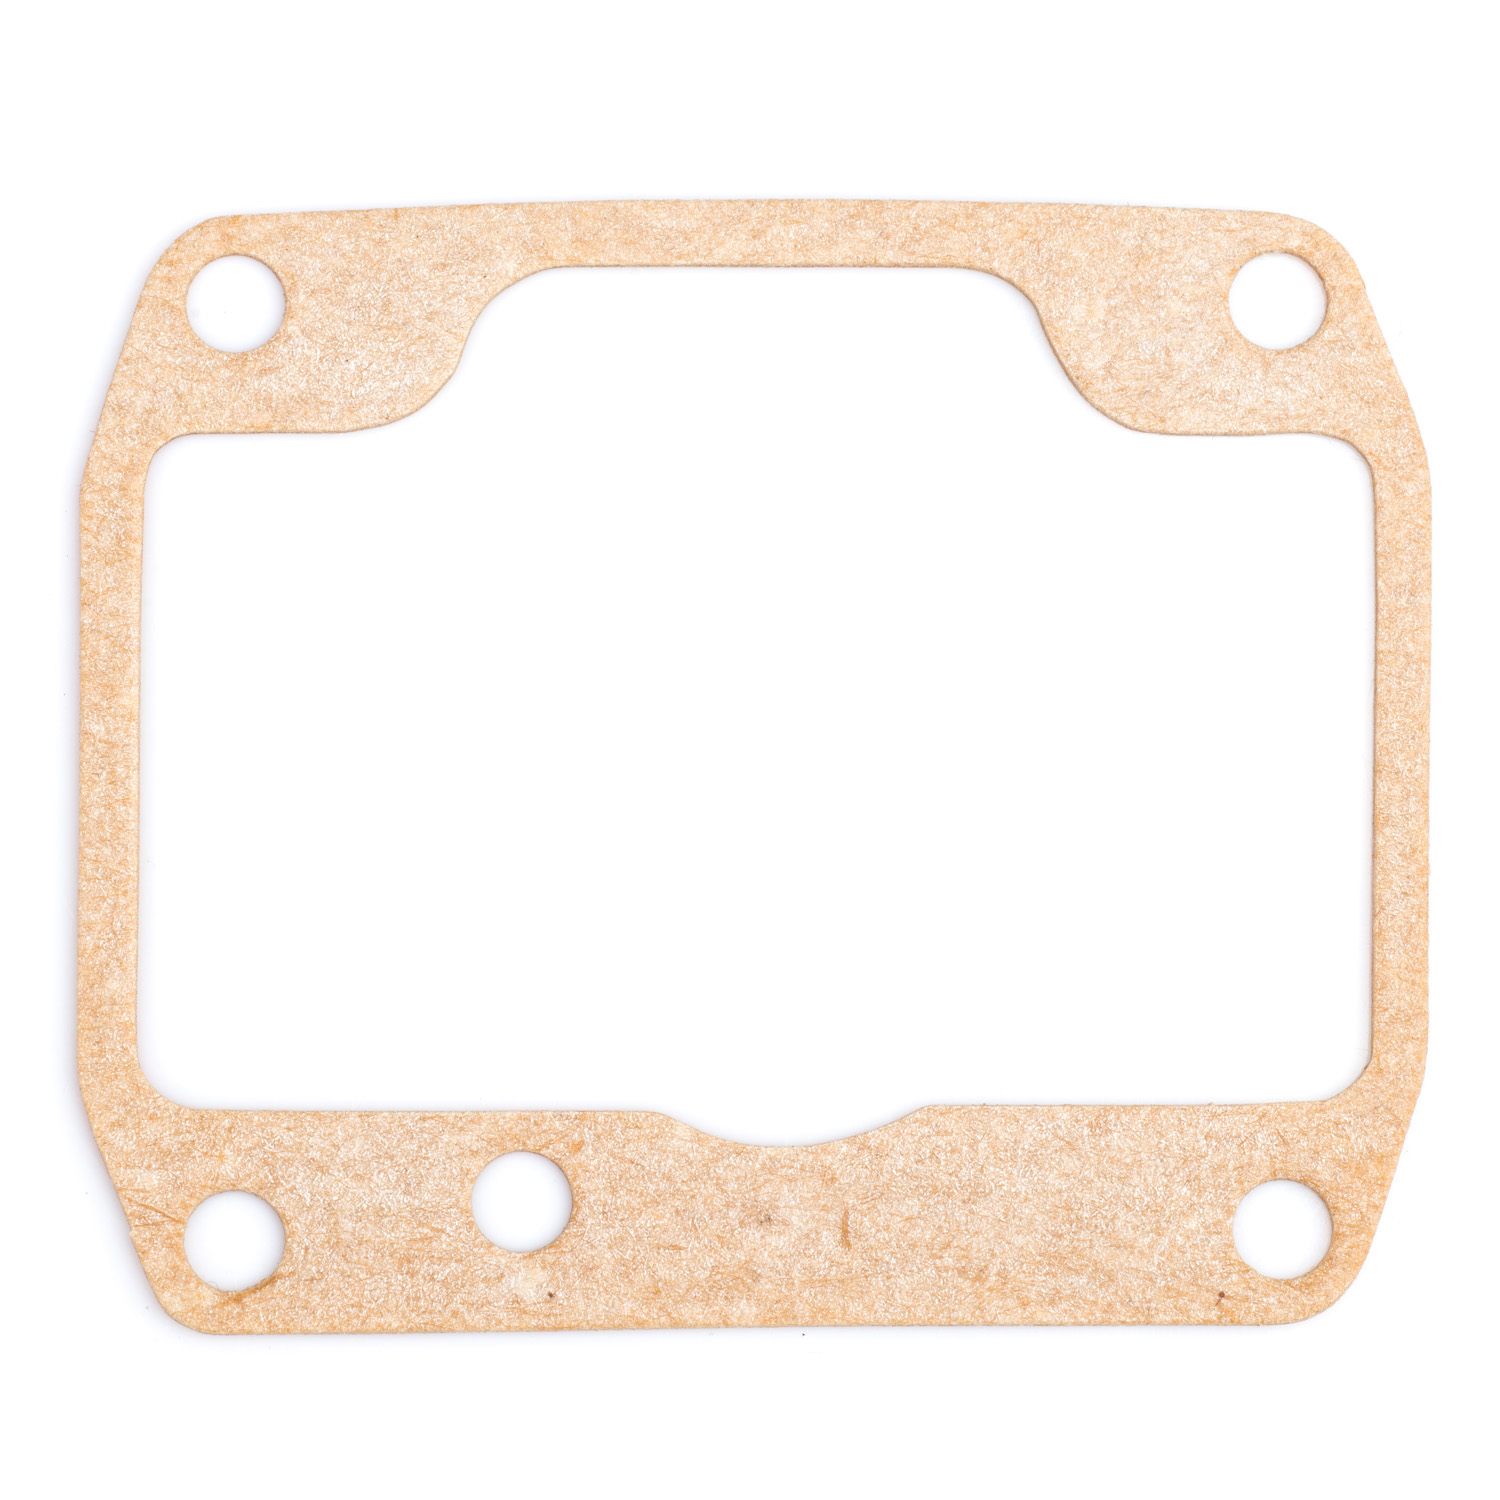 YZ125 Carb Float Bowl Gasket 1984 Only